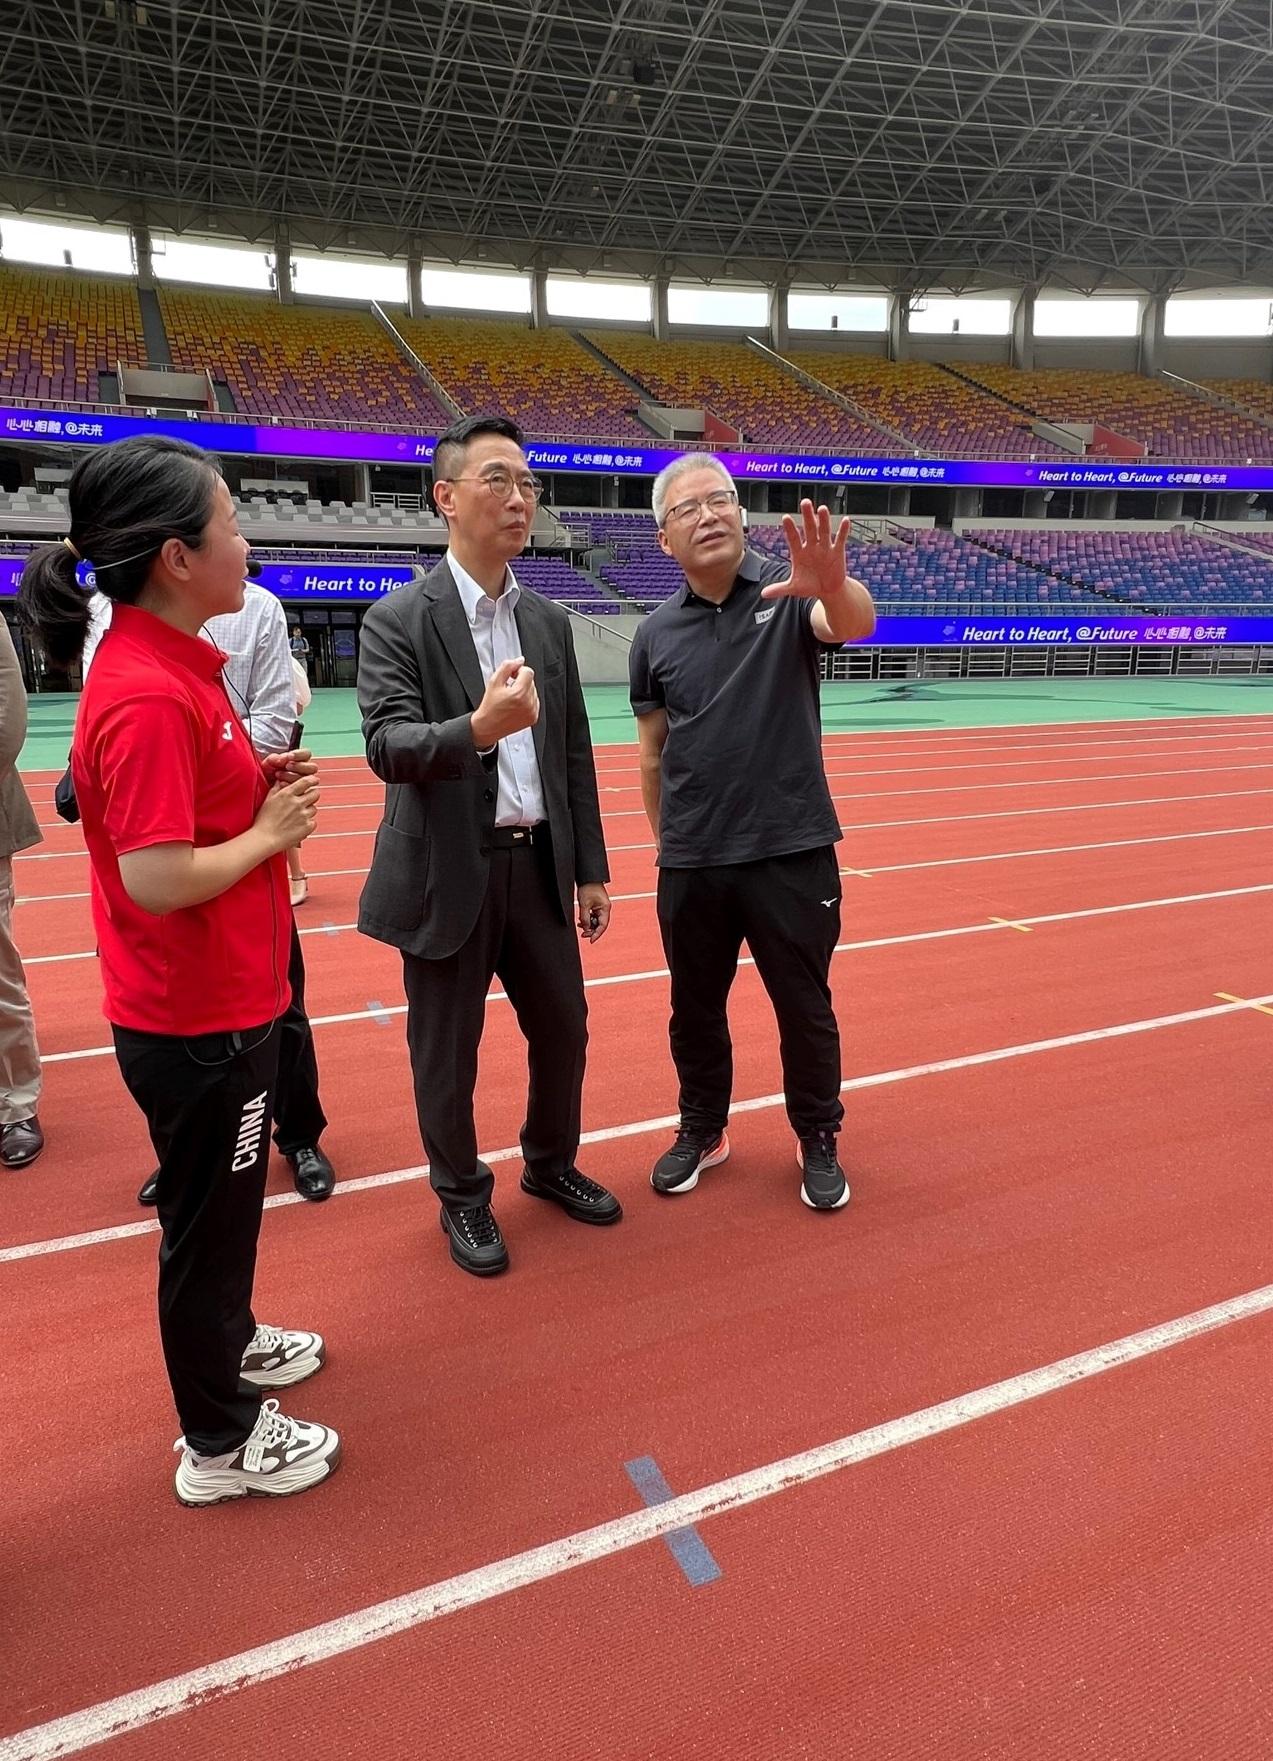 The Secretary for Culture, Sports and Tourism, Mr Kevin Yeung (centre), visited the Huanglong Sports Centre in Hangzhou today (August 1) to learn about its smart system in venue management and its operation.